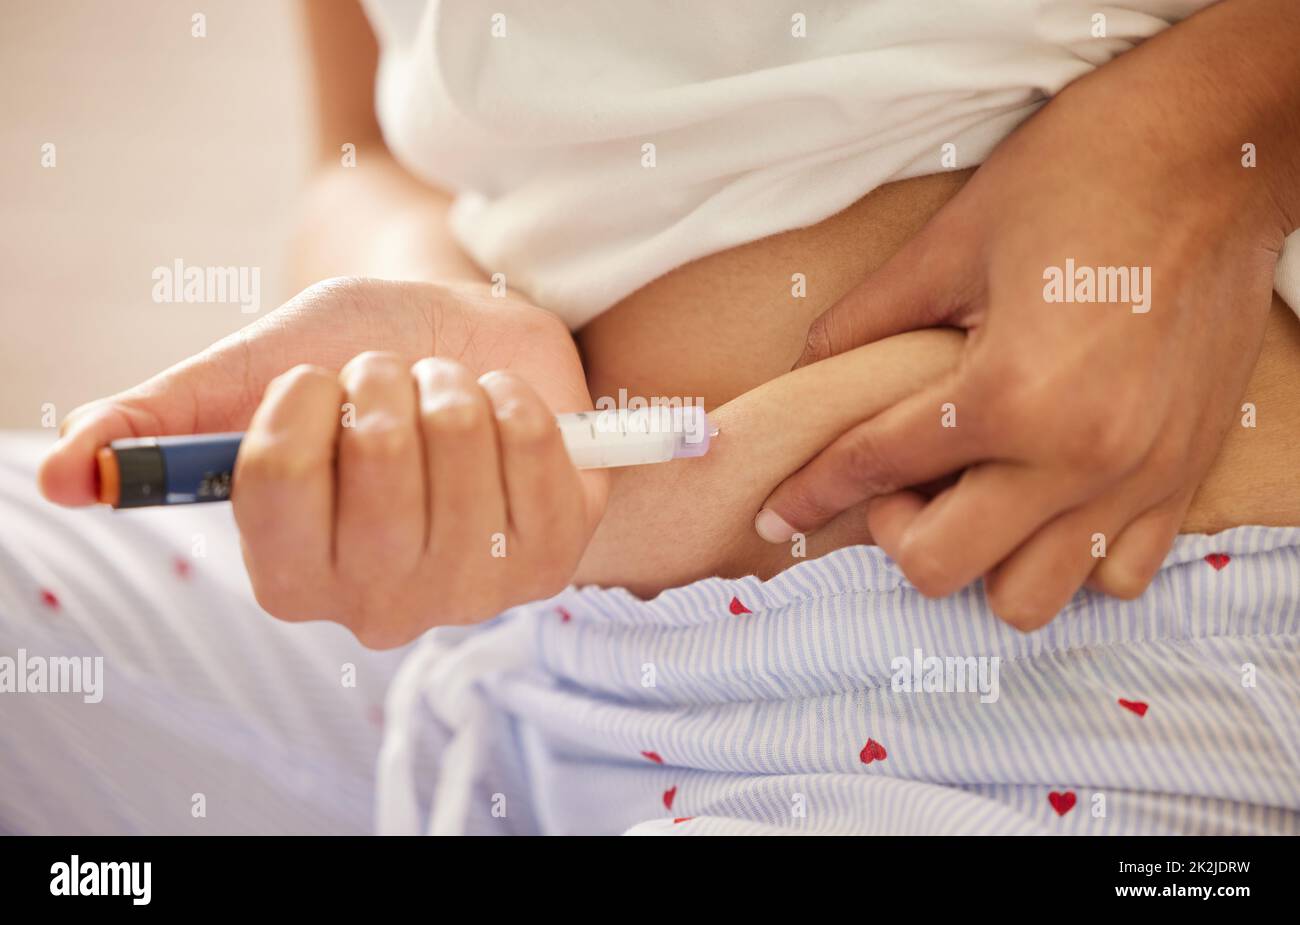 Time for some insulin. Closeup shot of an unrecognizable woman injecting herself in the stomach with insulin at home. Stock Photo